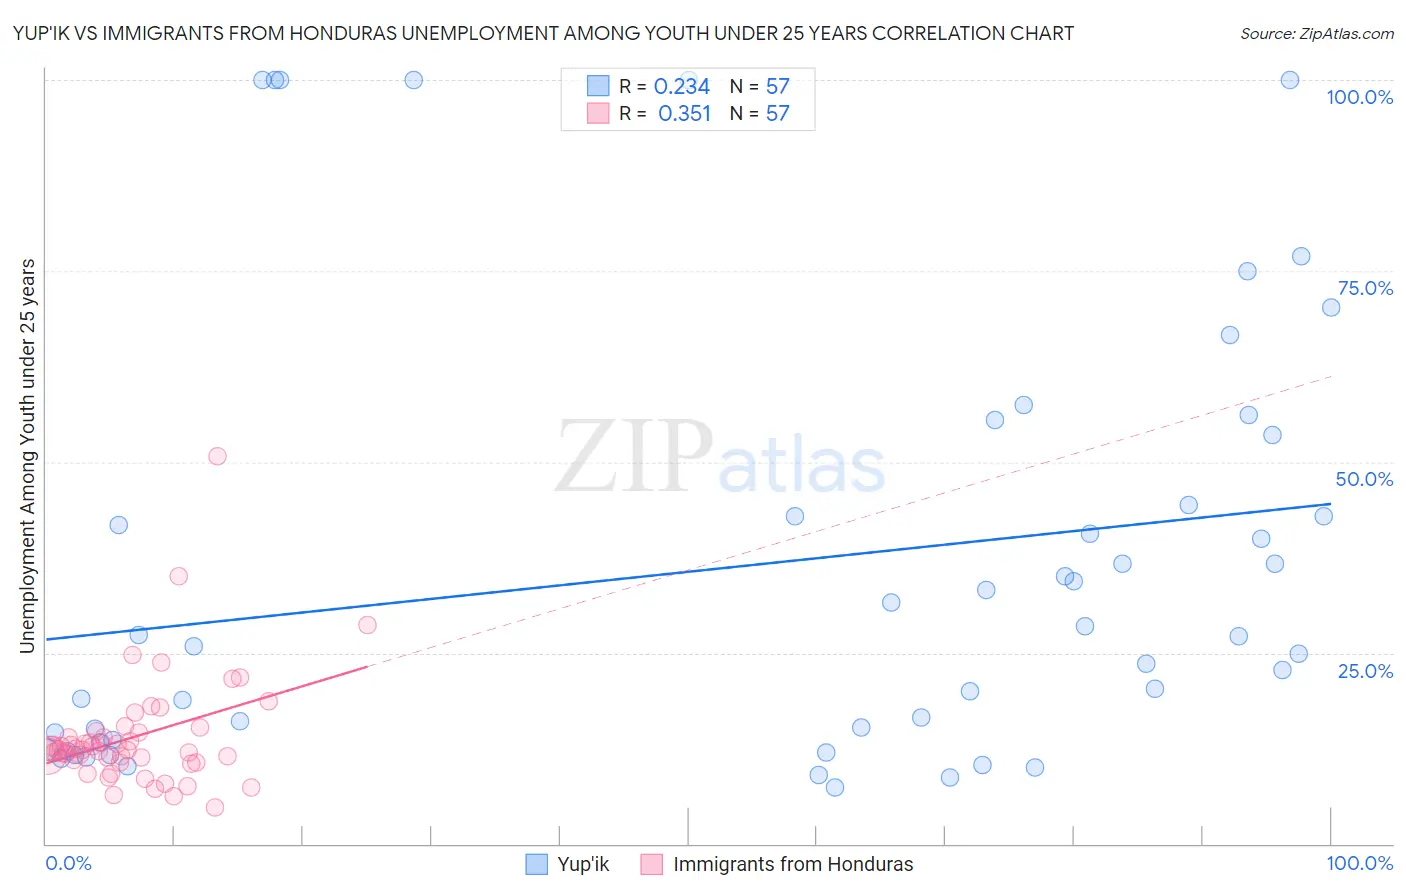 Yup'ik vs Immigrants from Honduras Unemployment Among Youth under 25 years